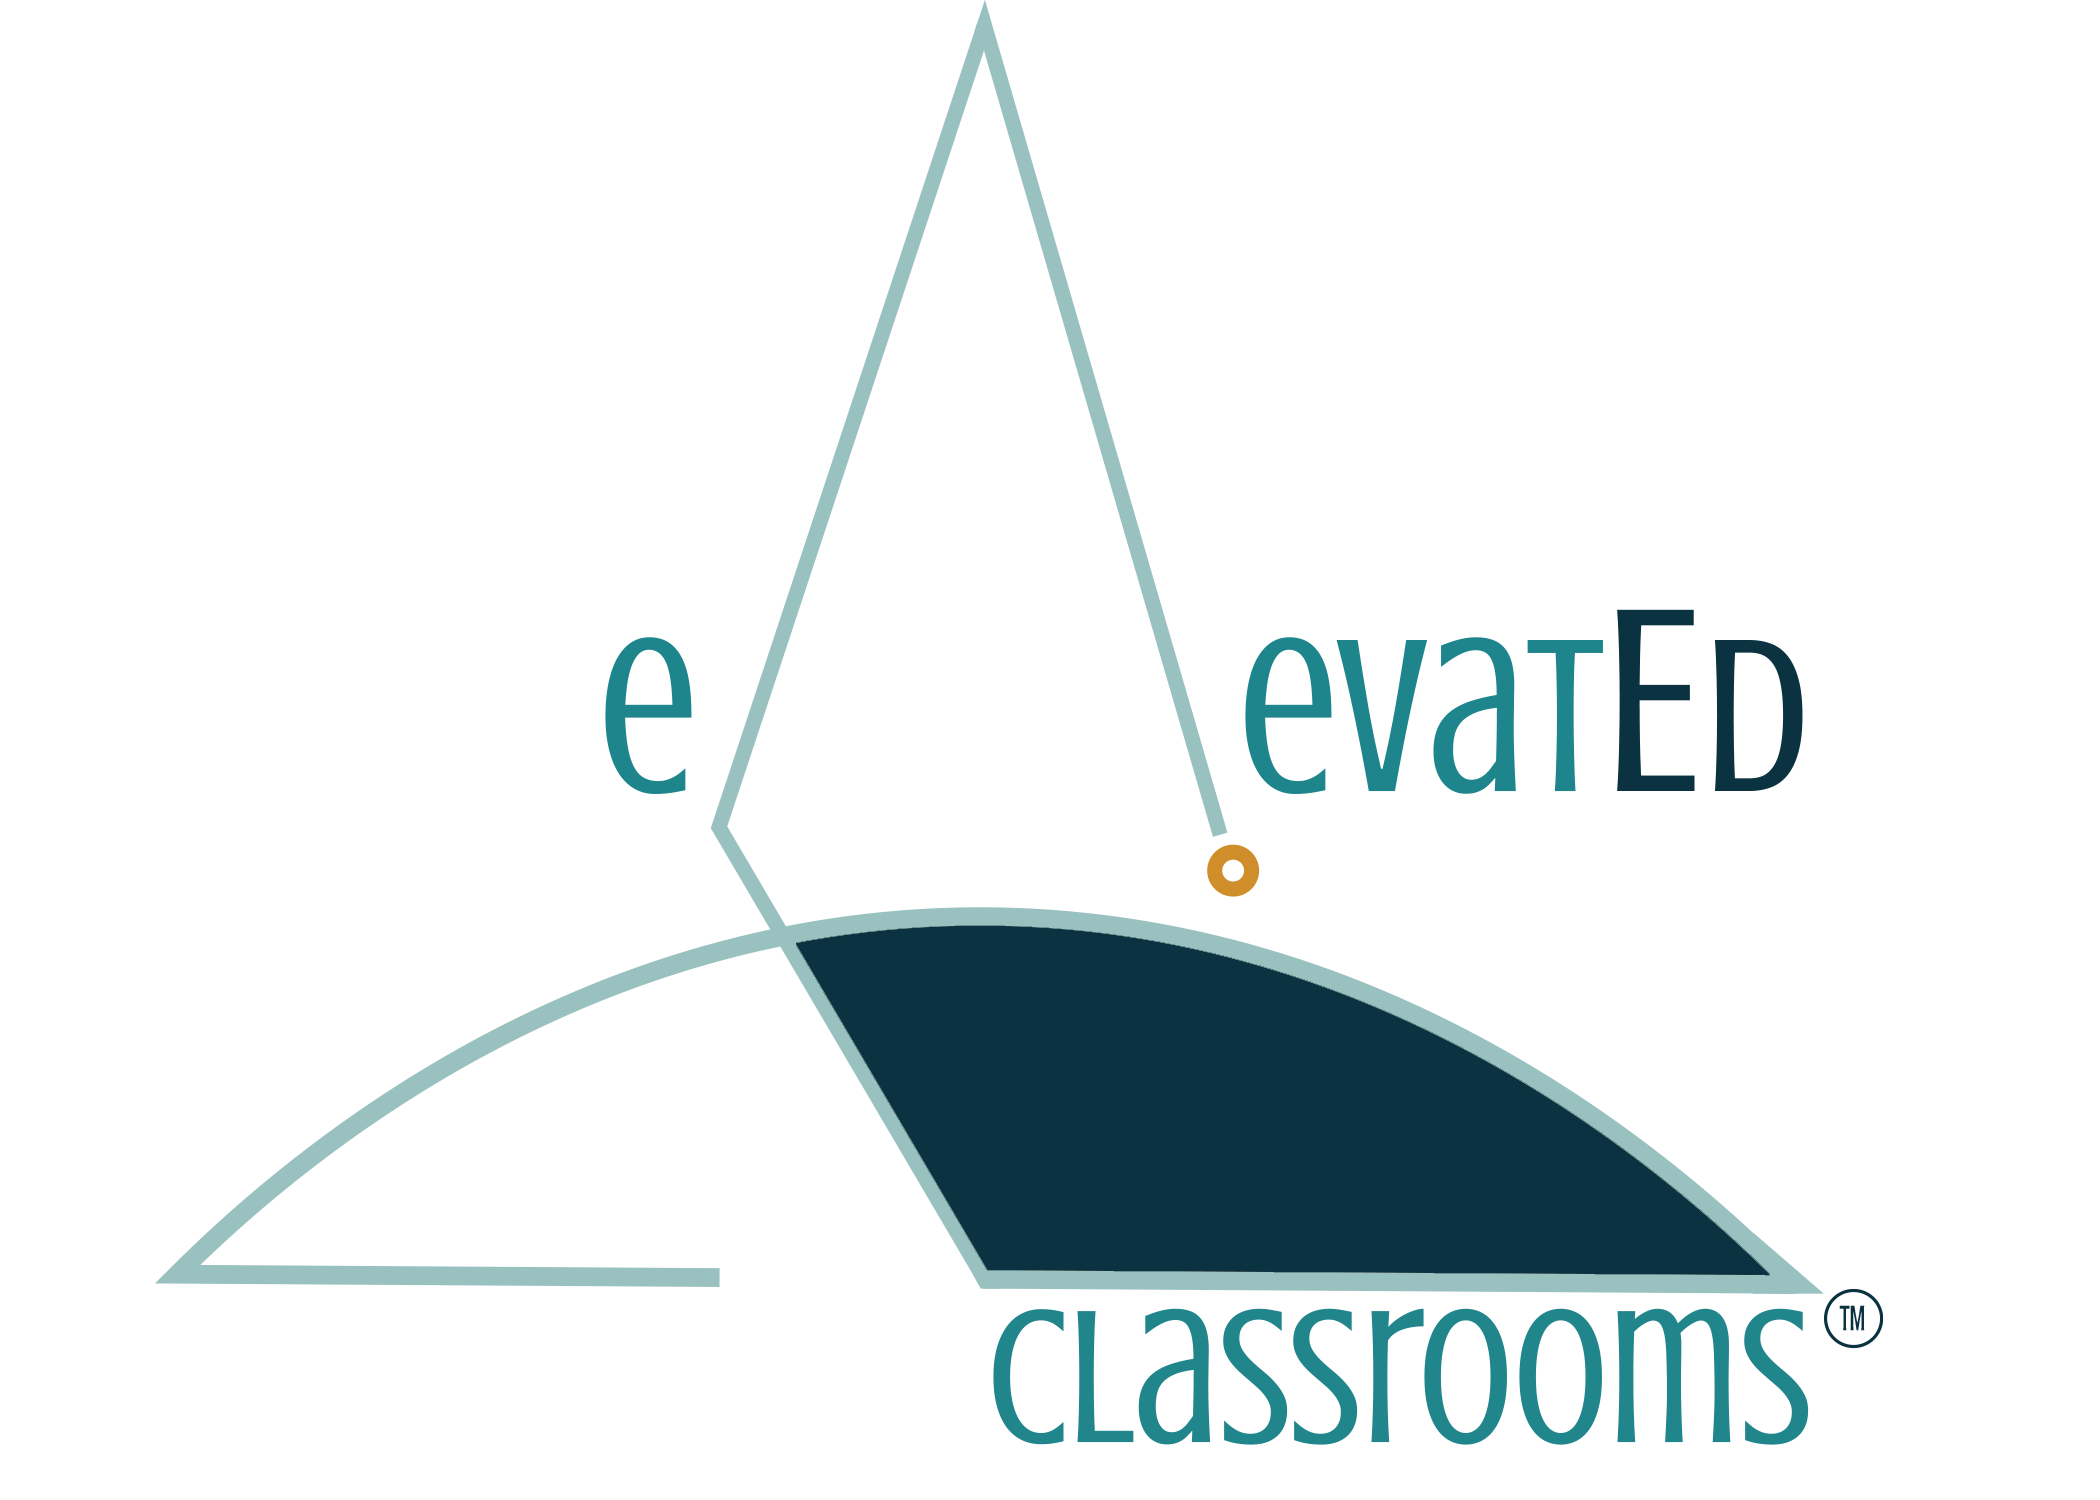 elevatEd Classroom logo: half-circle shape with triangle pointing up